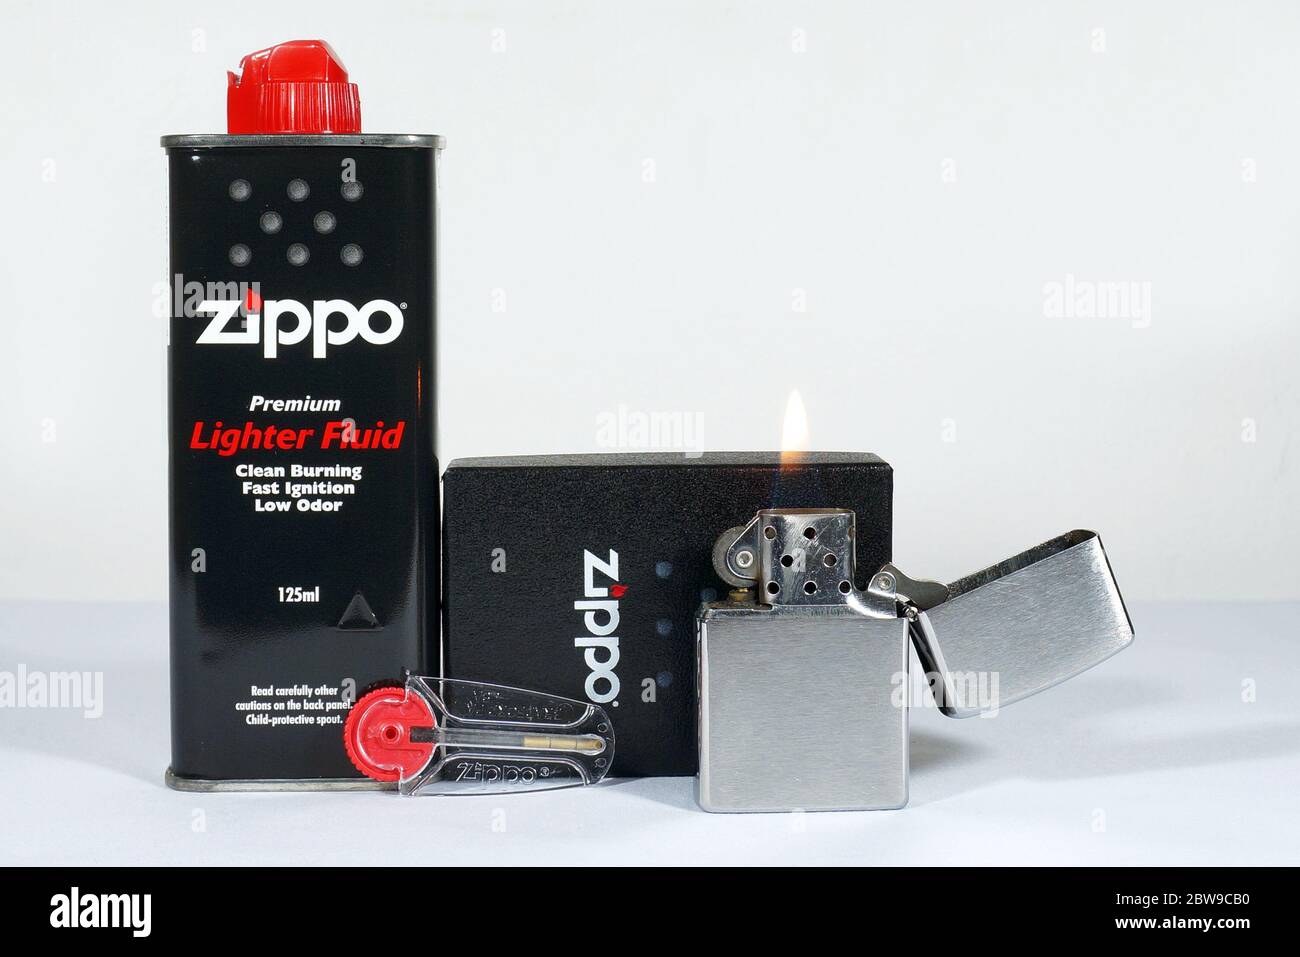 A sample set of zippo products for advertisement. Photo taken in a shop in Benguet, Philippines on October 10, 2019. Stock Photo